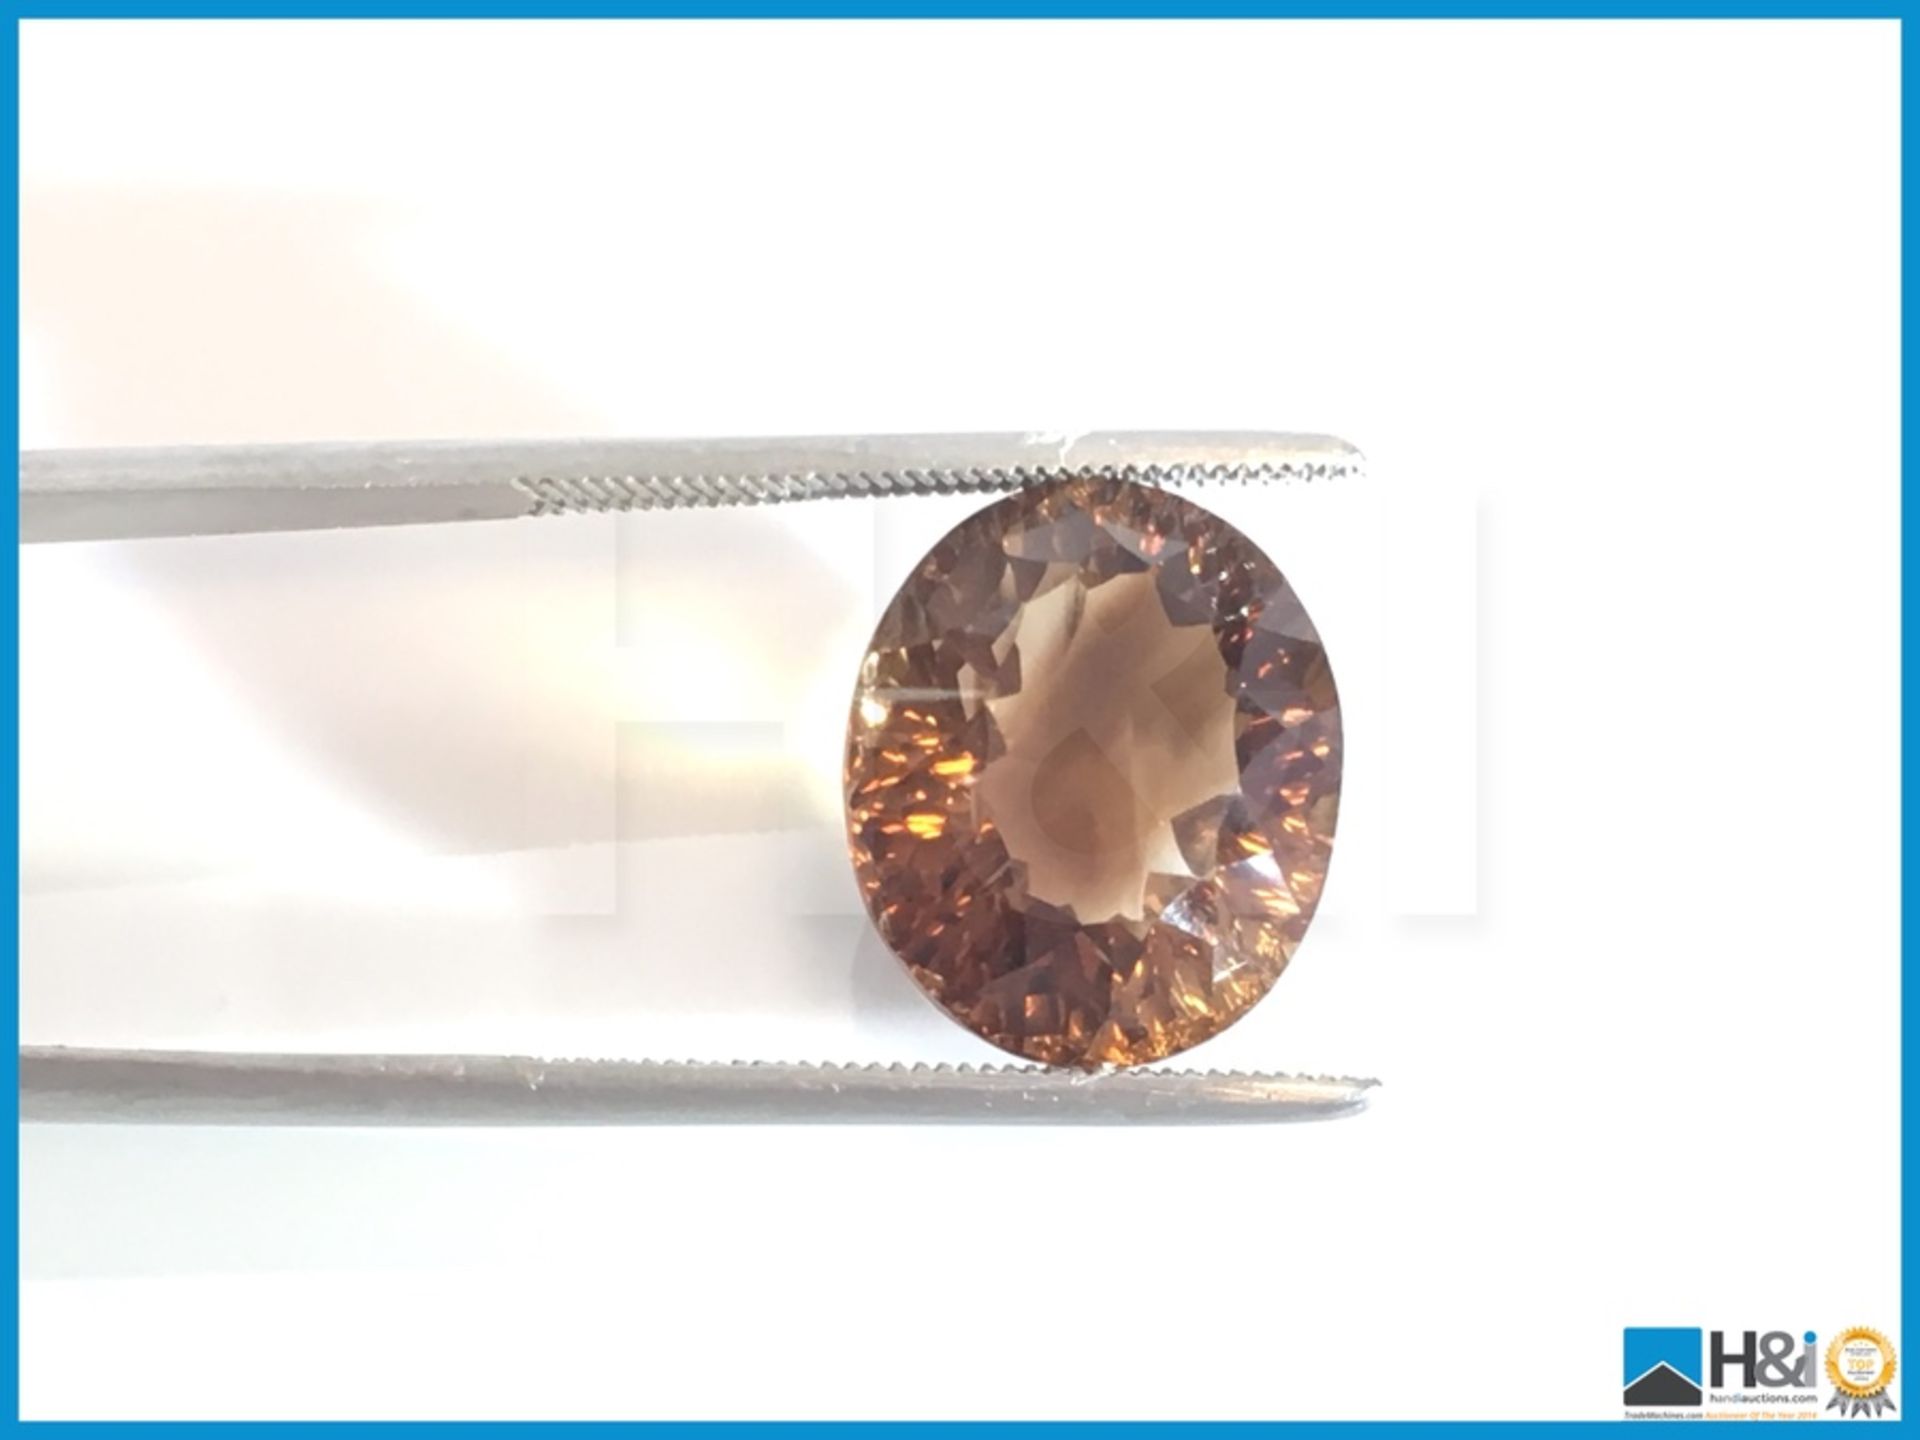 13.56ct Natural Topaz.Oval Facetted Cut in Yellowish Brown. Transparrent with GIL Certificate 14. - Image 3 of 4